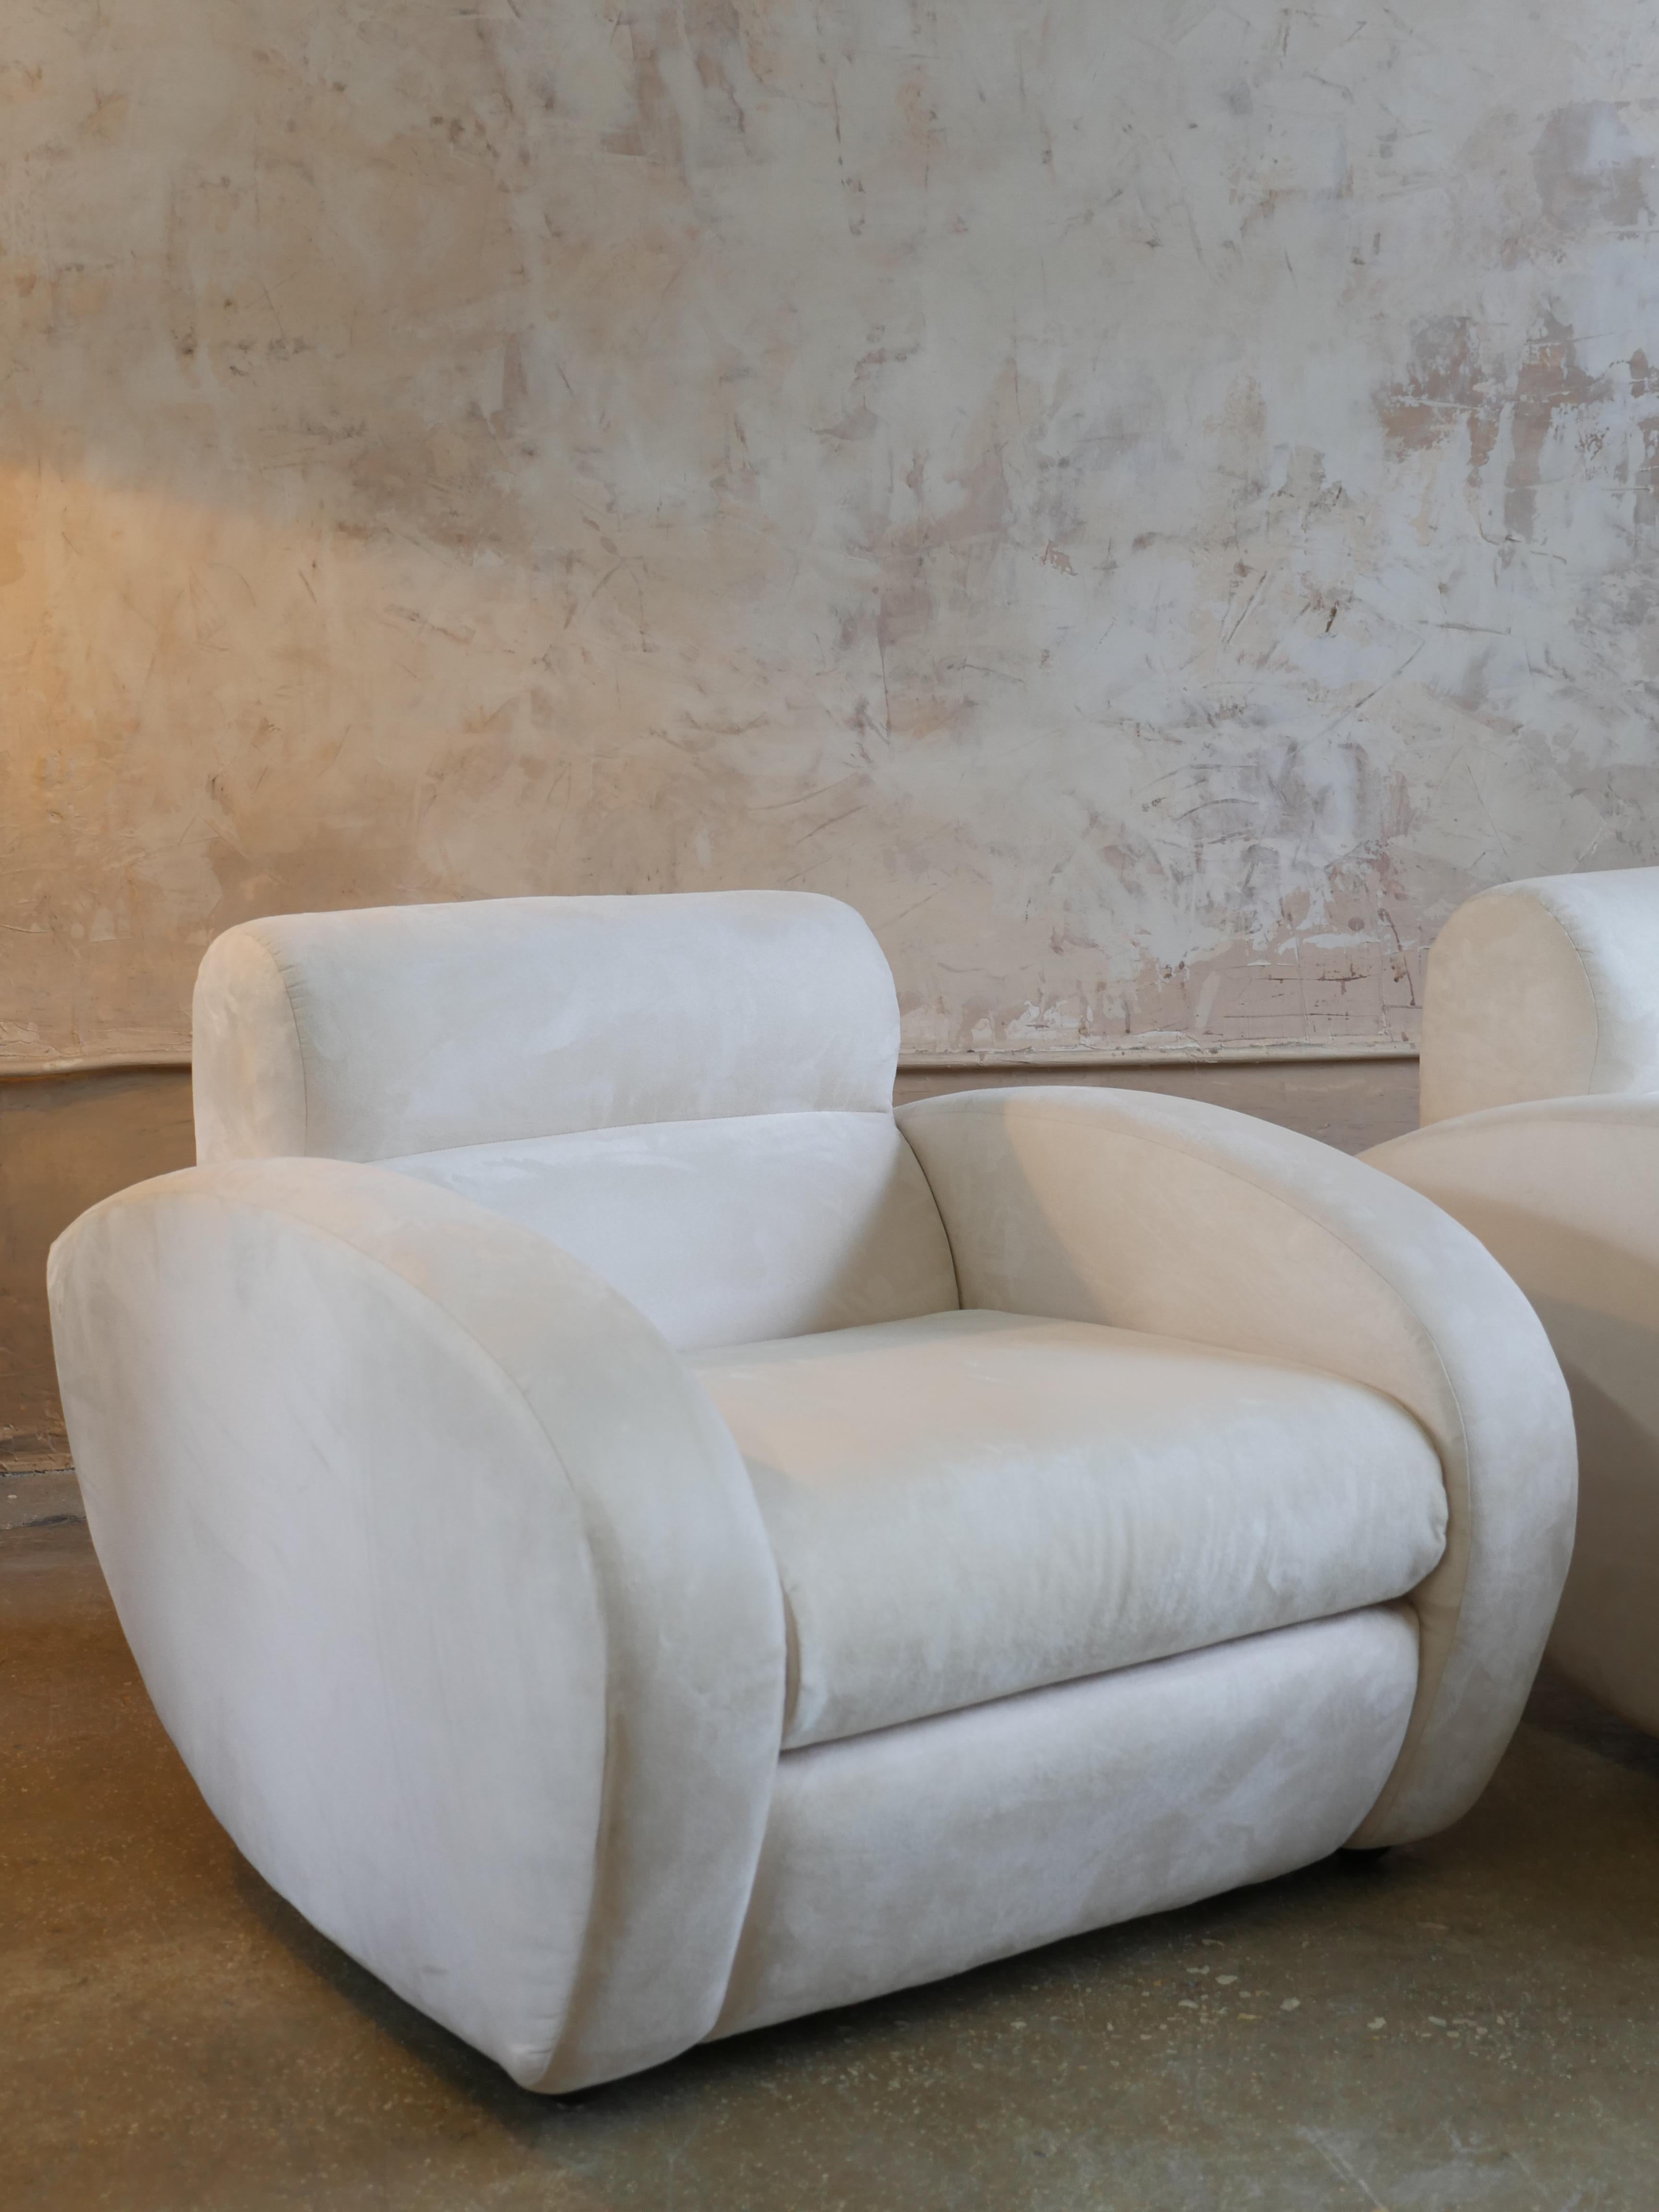 Ultrasuede Wieman/Preview Furniture Lounge Chairs - Set of 2